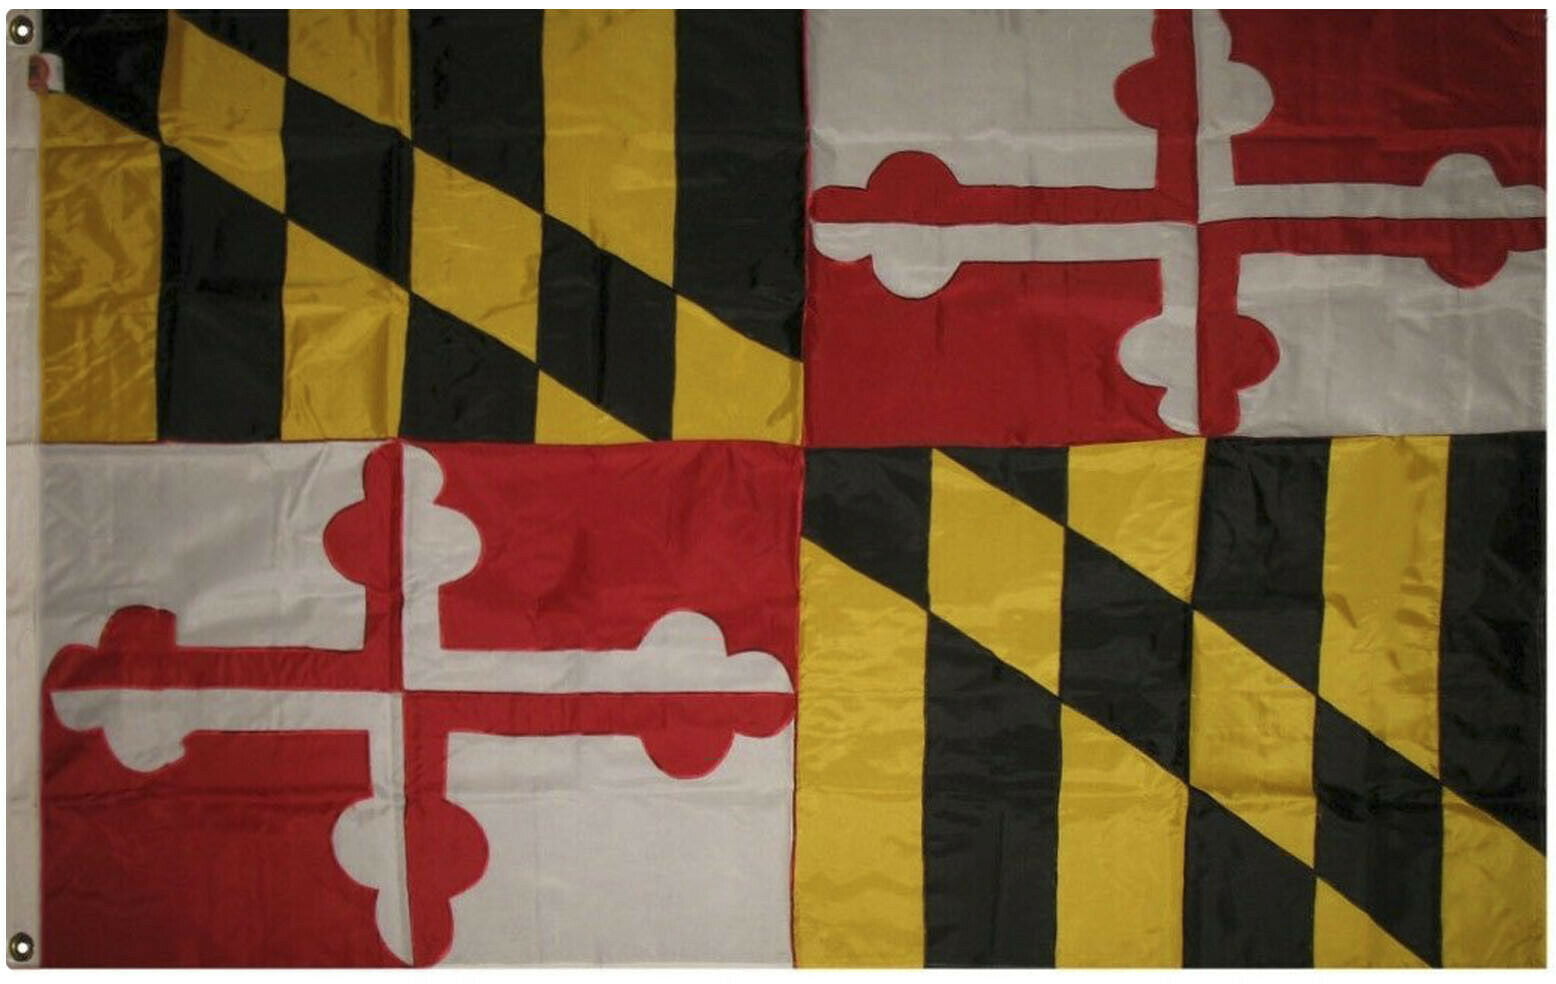 4x6 Embroidered Sewn State of Maryland flag 4'x6' banner grommets clips 